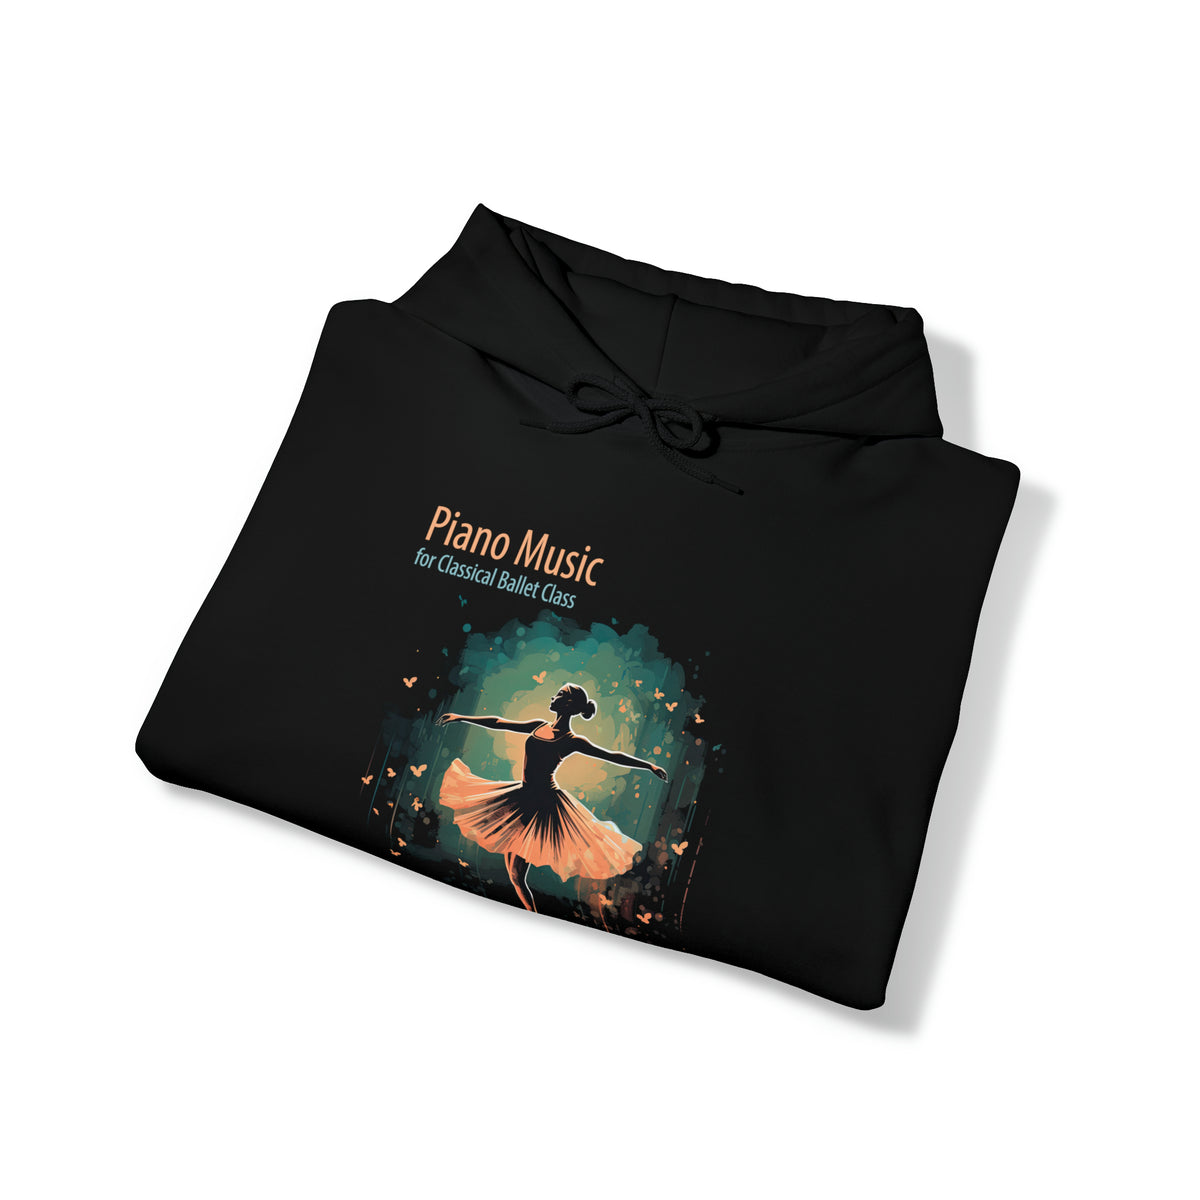 Piano Music for Classical Ballet Class Vol. 6 - Unisex Heavy Blend™ Hooded Sweatshirt